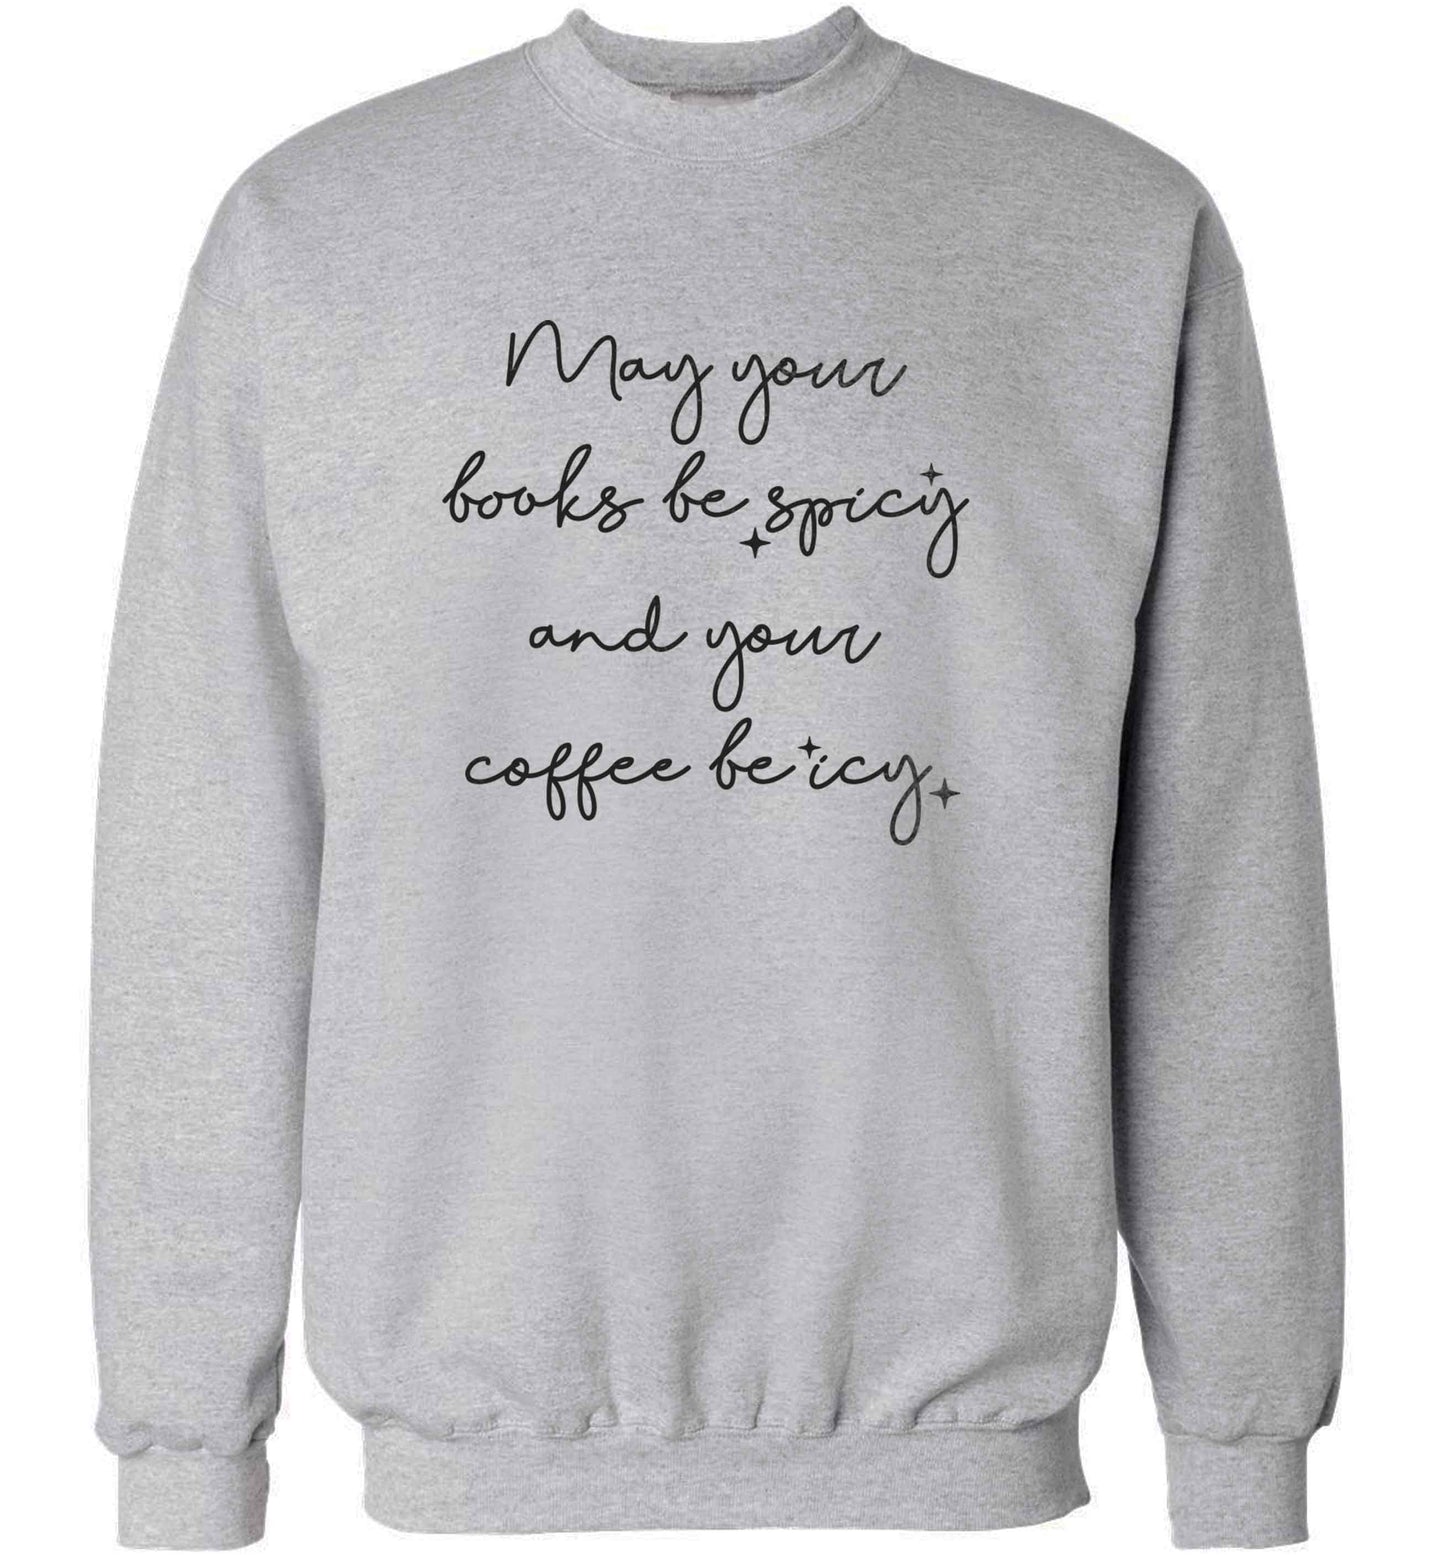 May your books be spicy and your coffee be icy adult's unisex grey sweater 2XL